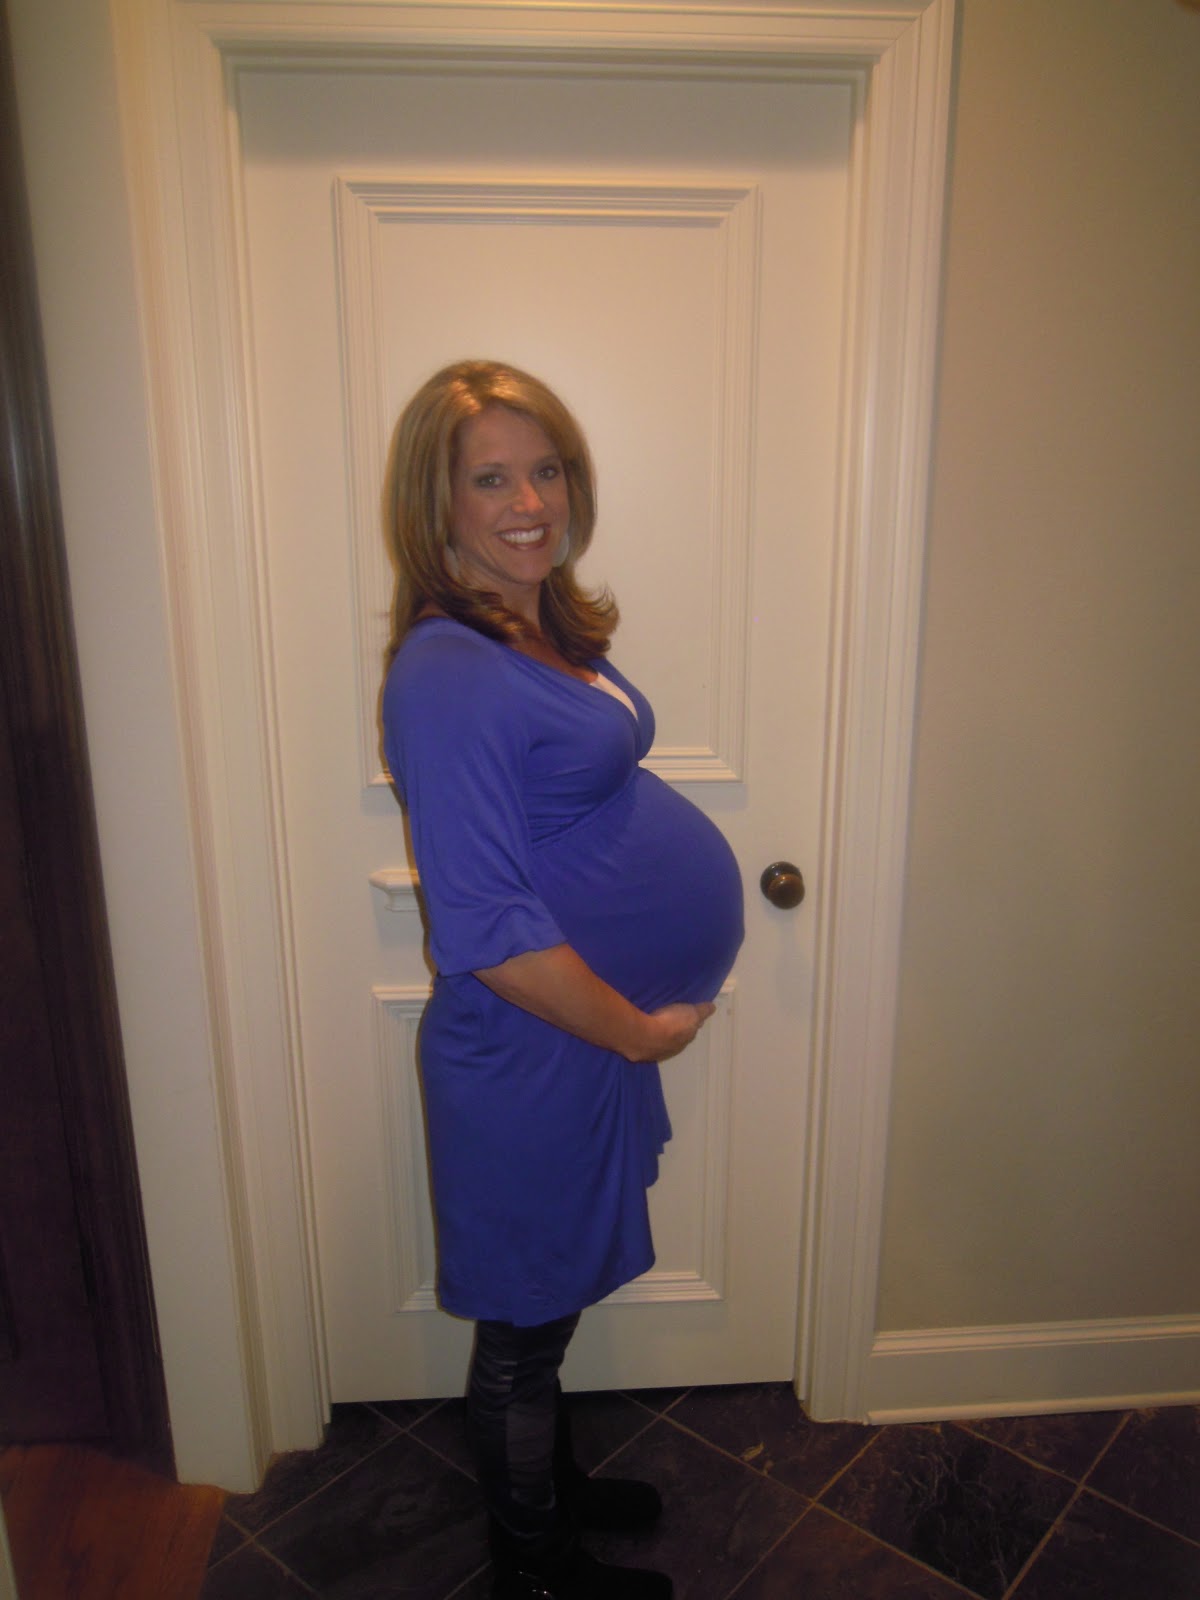 37 Weeks Pregnant: Not at all ready for a baby - Crazy 